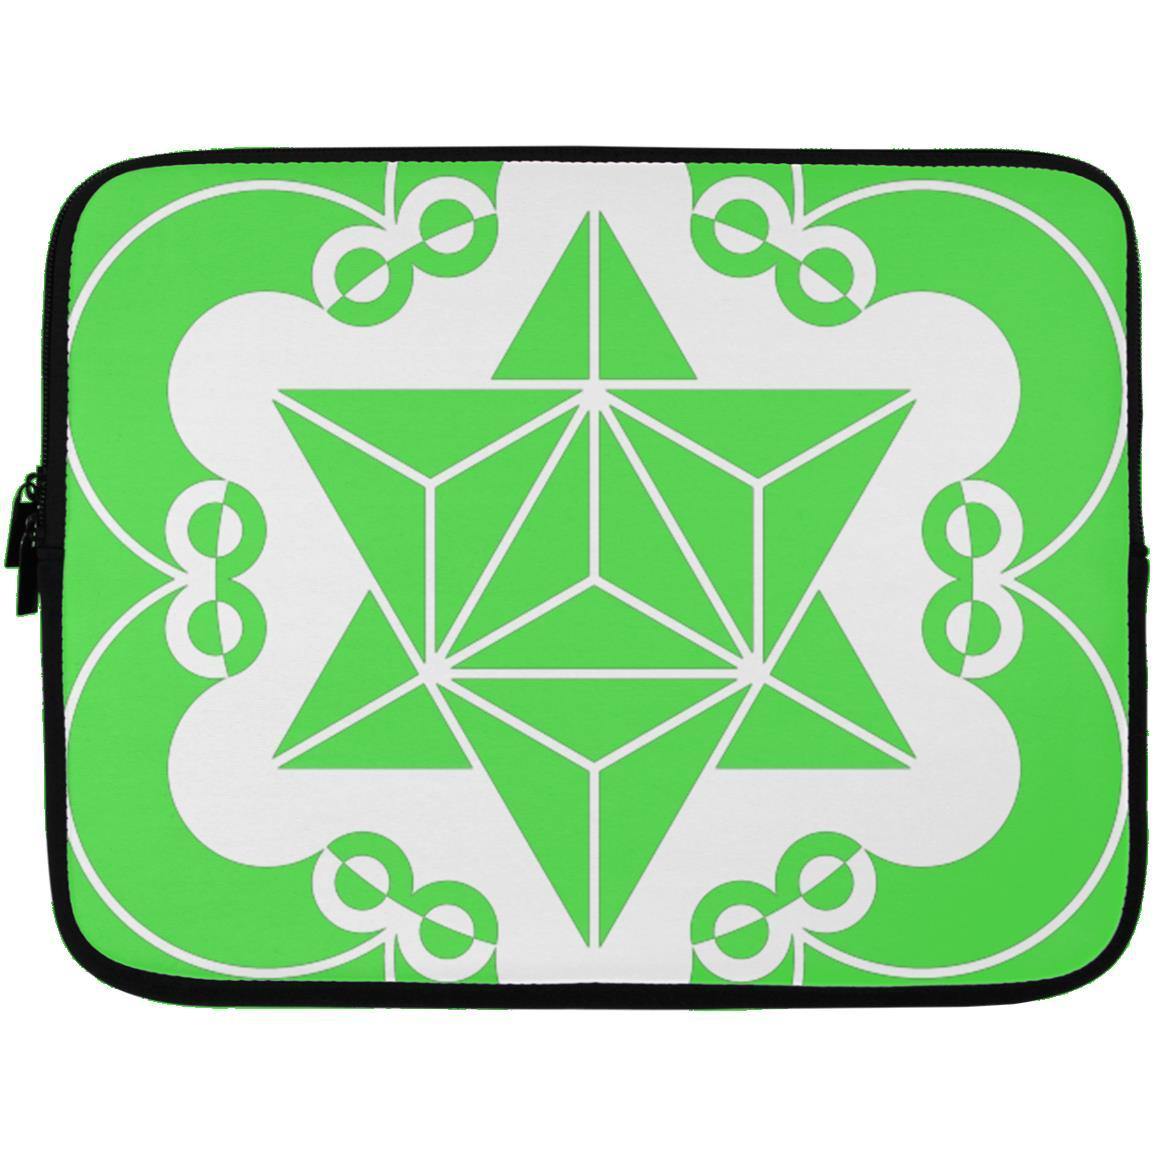 Crop Circle Laptop Sleeve - Cley Hill 2 - Shapes of Wisdom